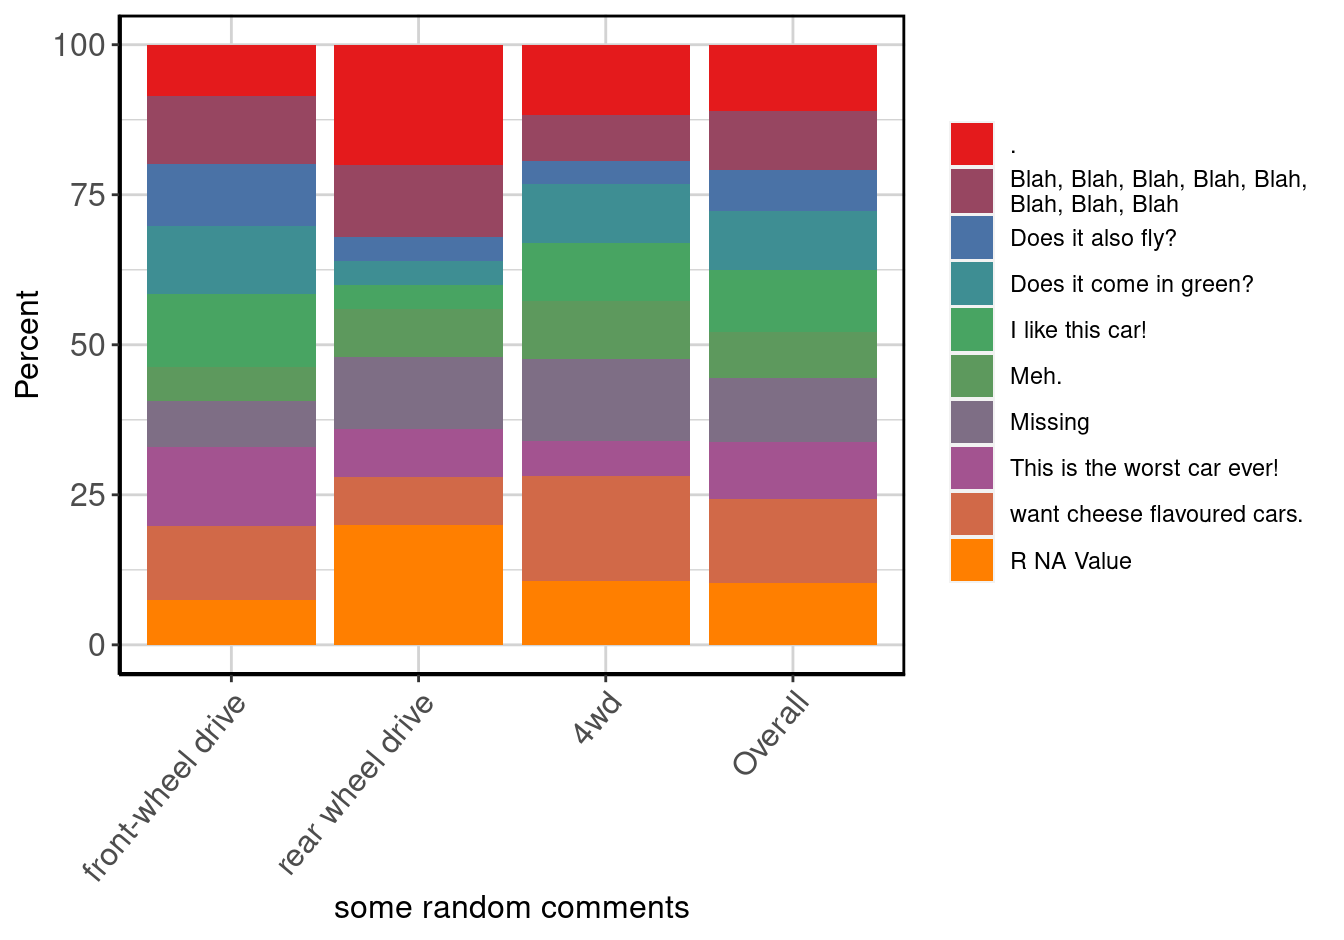 Stacked barplot of <b>some random comments</b> by <b>drive type</b>.